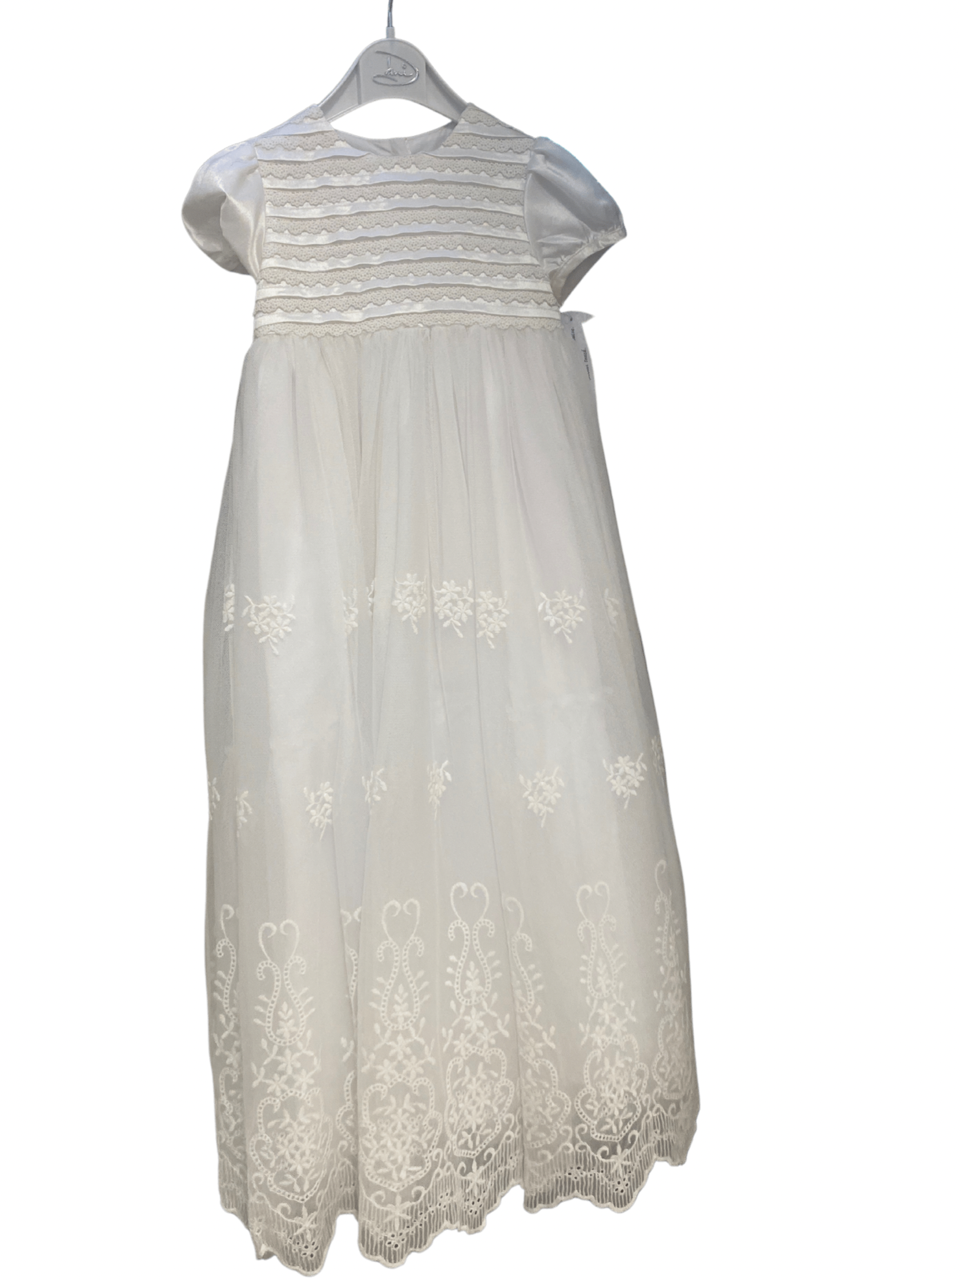 Sarah Louise Girls White Long Lace Christening Gown 094 with Bonnet